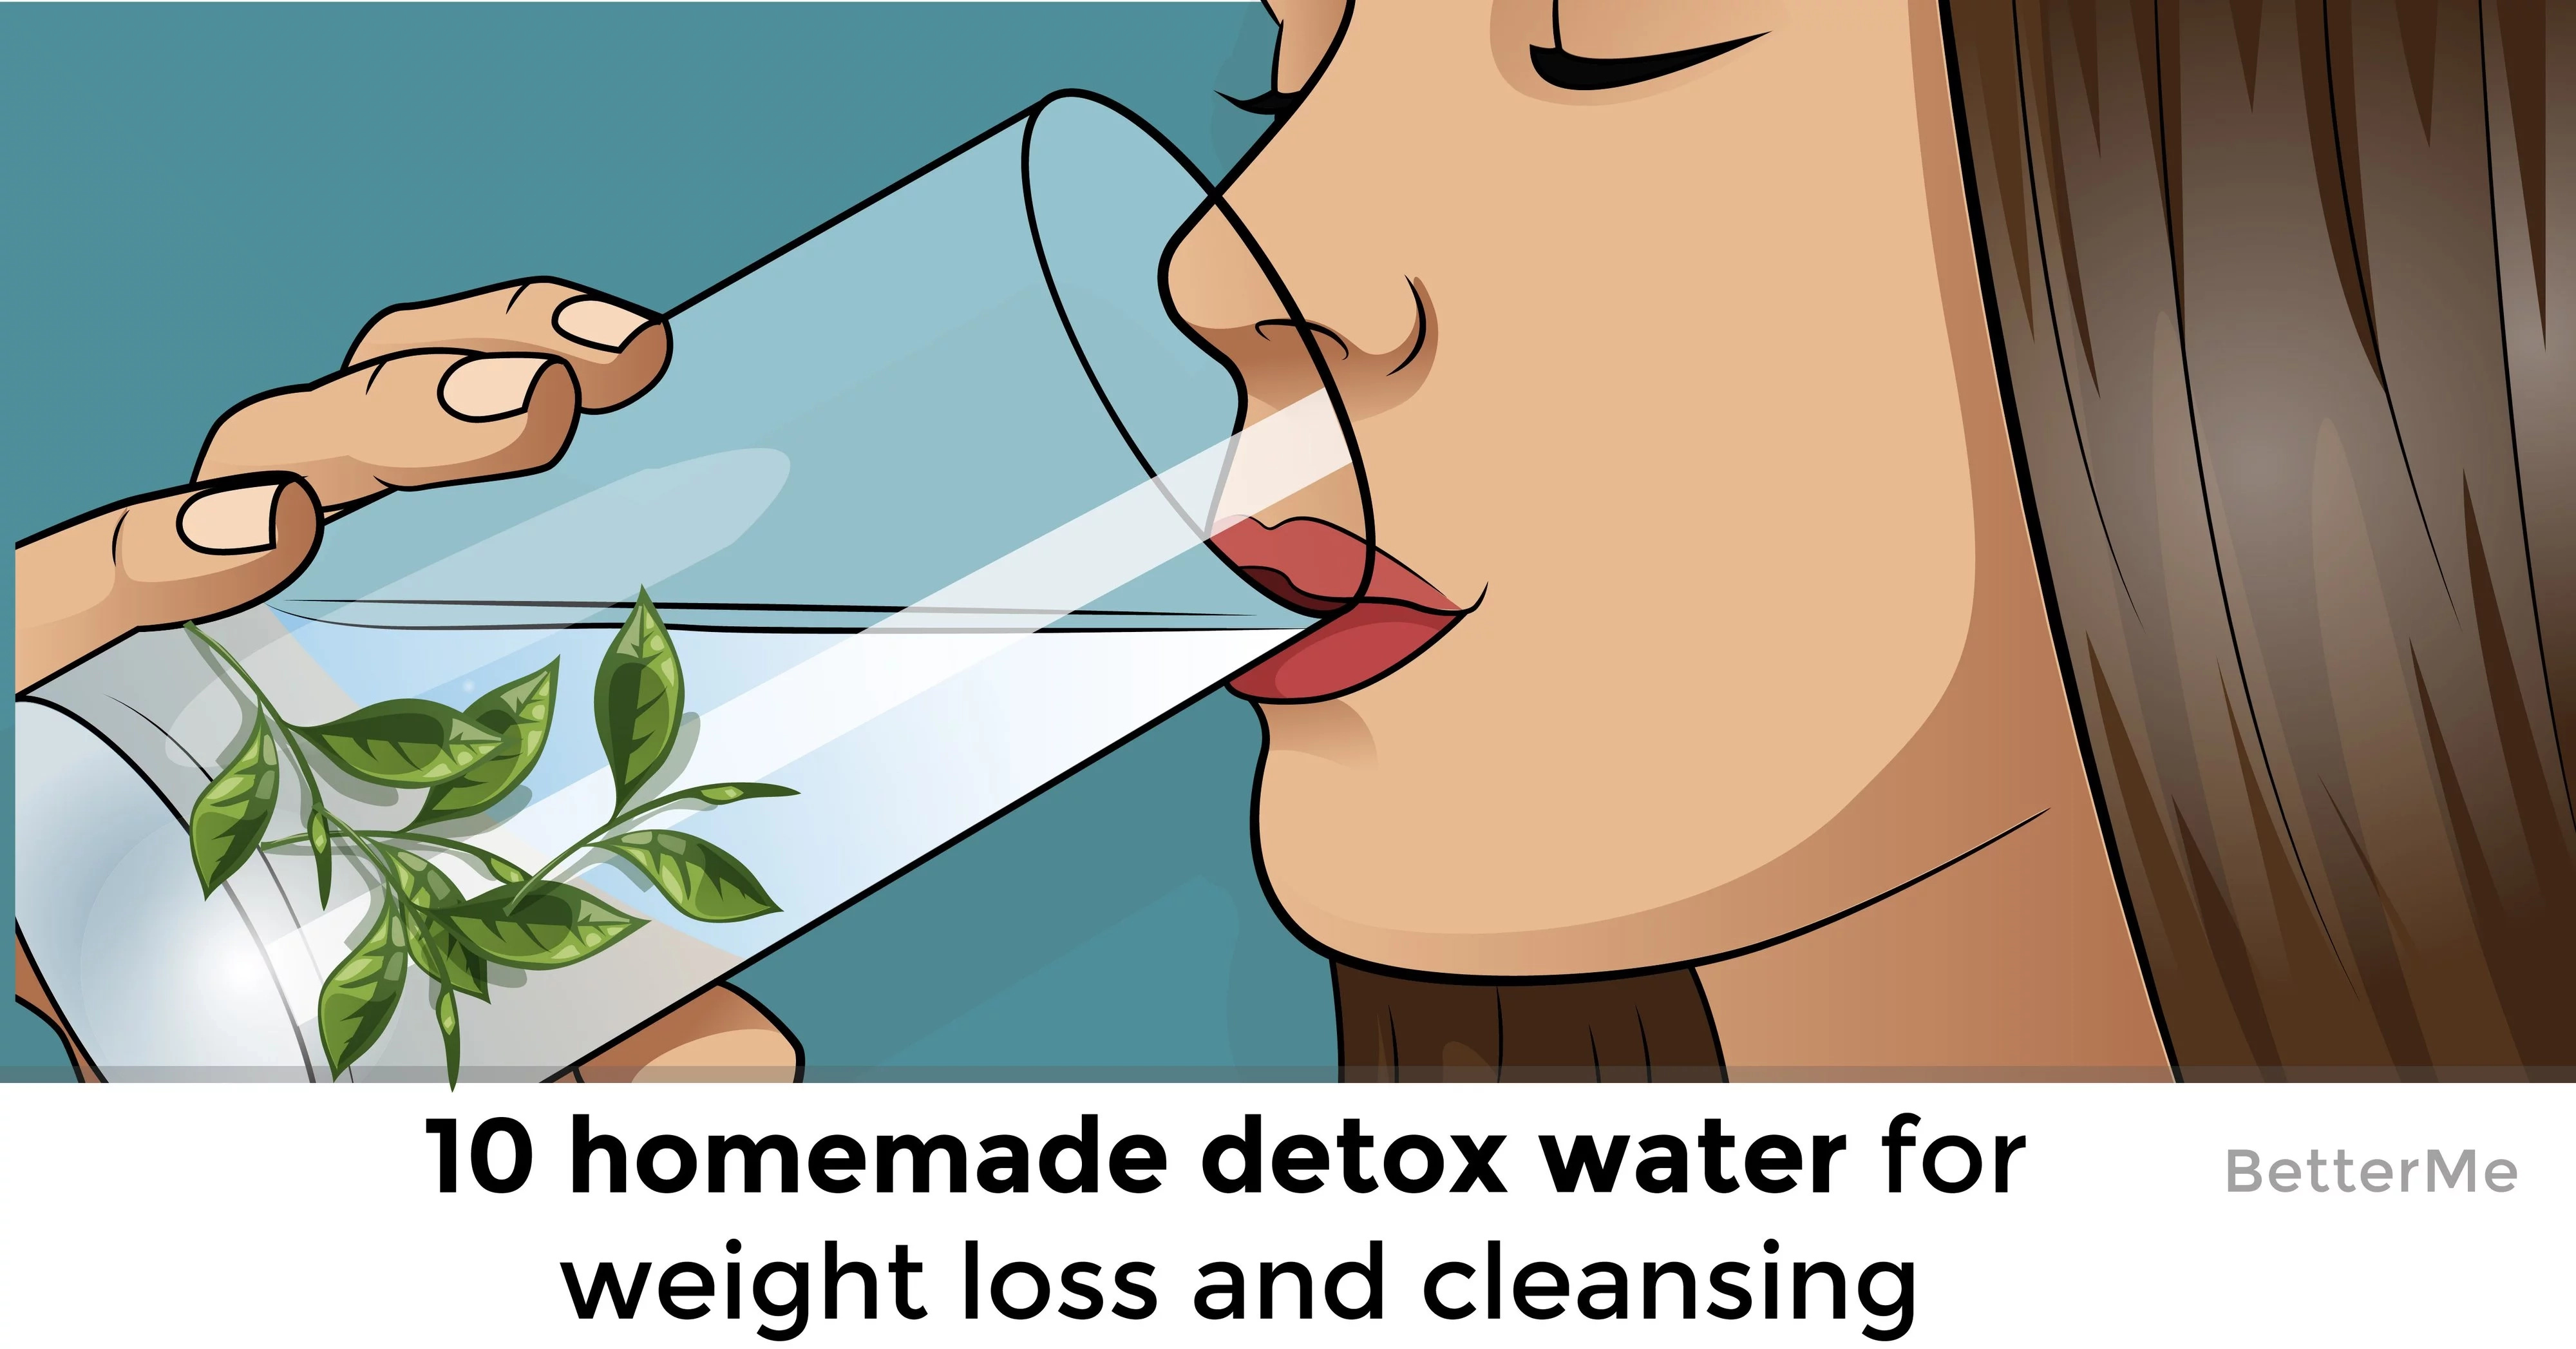 10 homemade detox-water recipes for